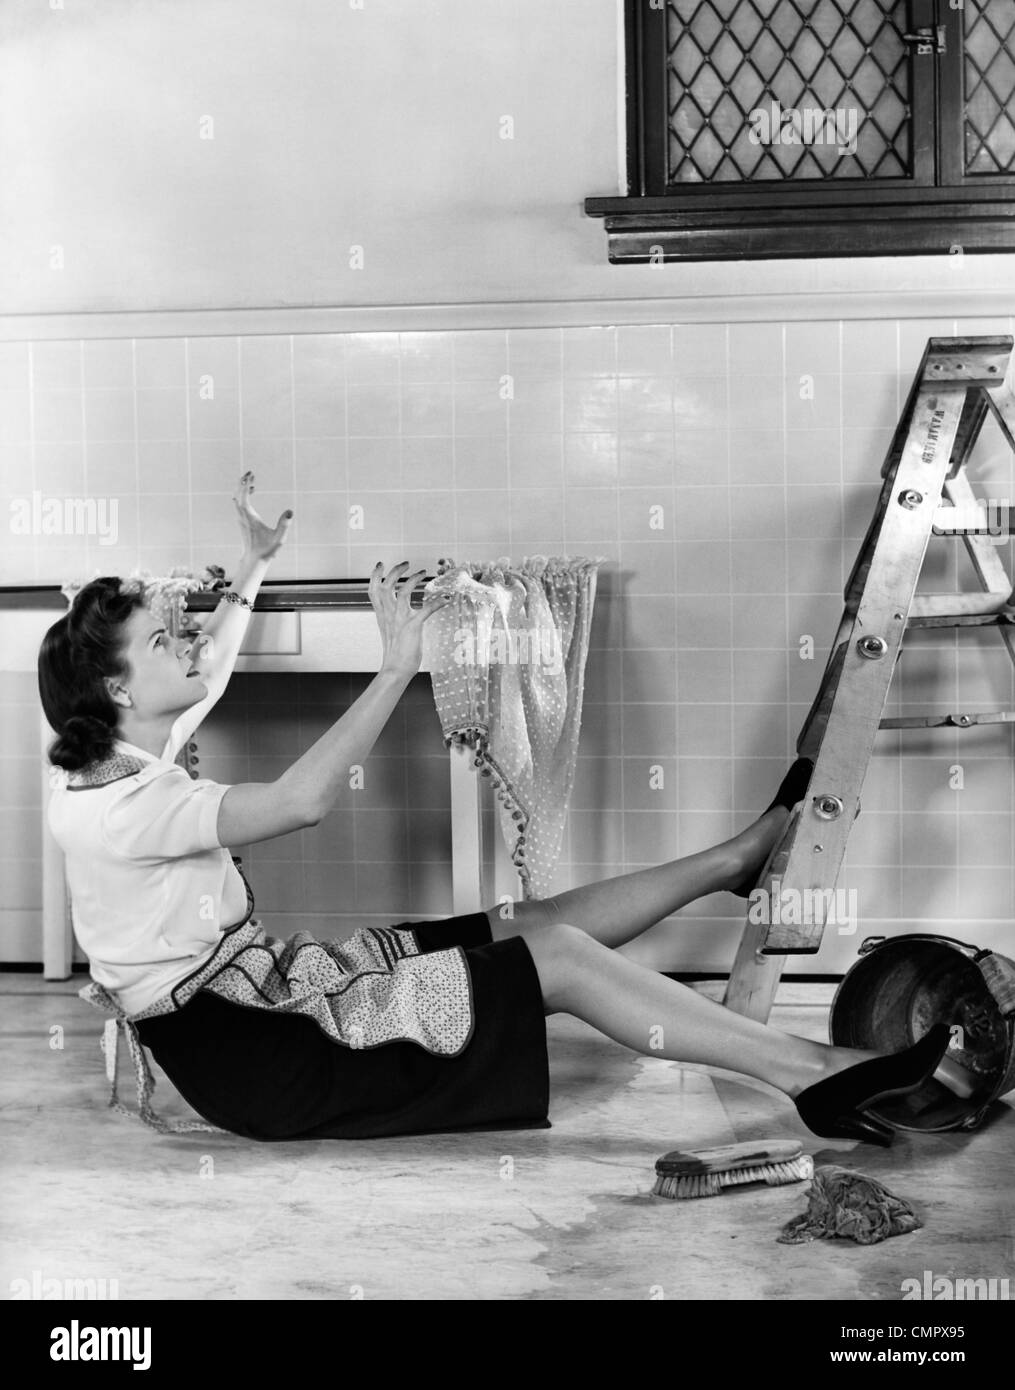 1940s WOMAN HOUSEWIFE FALLING FROM STEP LADDER IN KITCHEN WHILE WASHING WINDOW Stock Photo